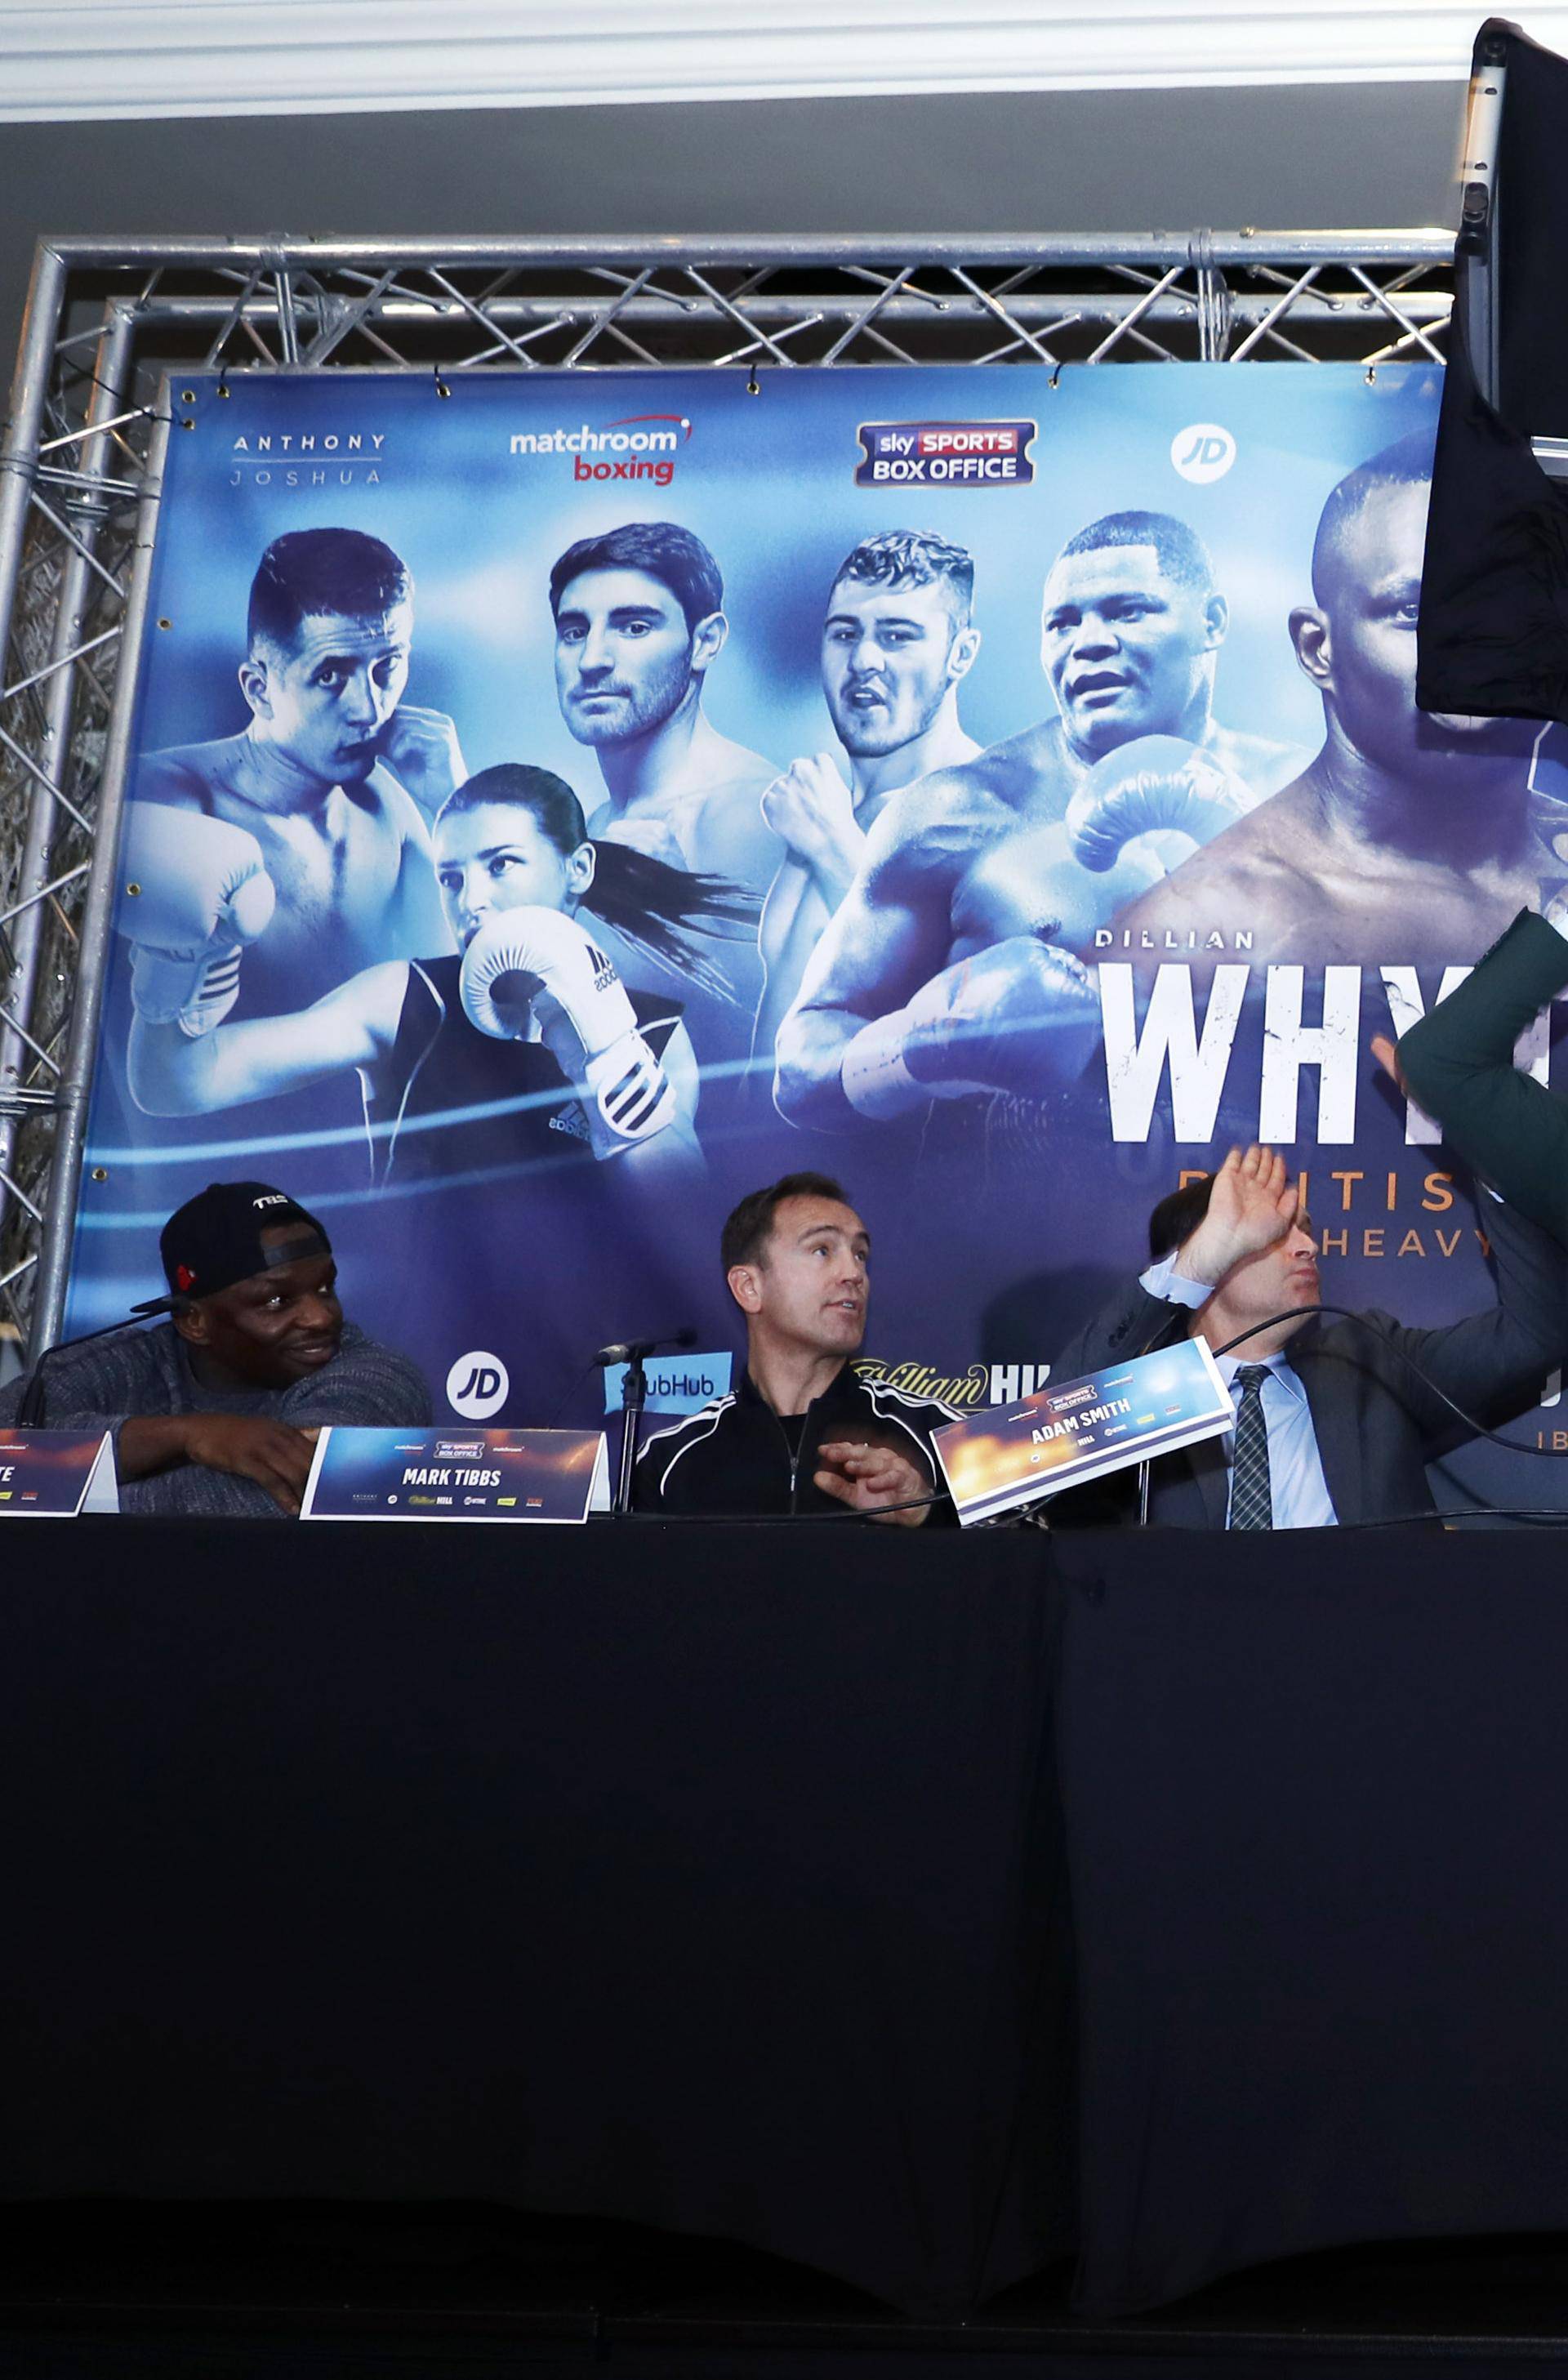 Dillian Whyte, trainer Mark Tibbs, Sky Sports' Adam Smith, promoter Eddie Hearn and promoter Kalle Sauerland look on as Dereck Chisora throws a table during the press conference